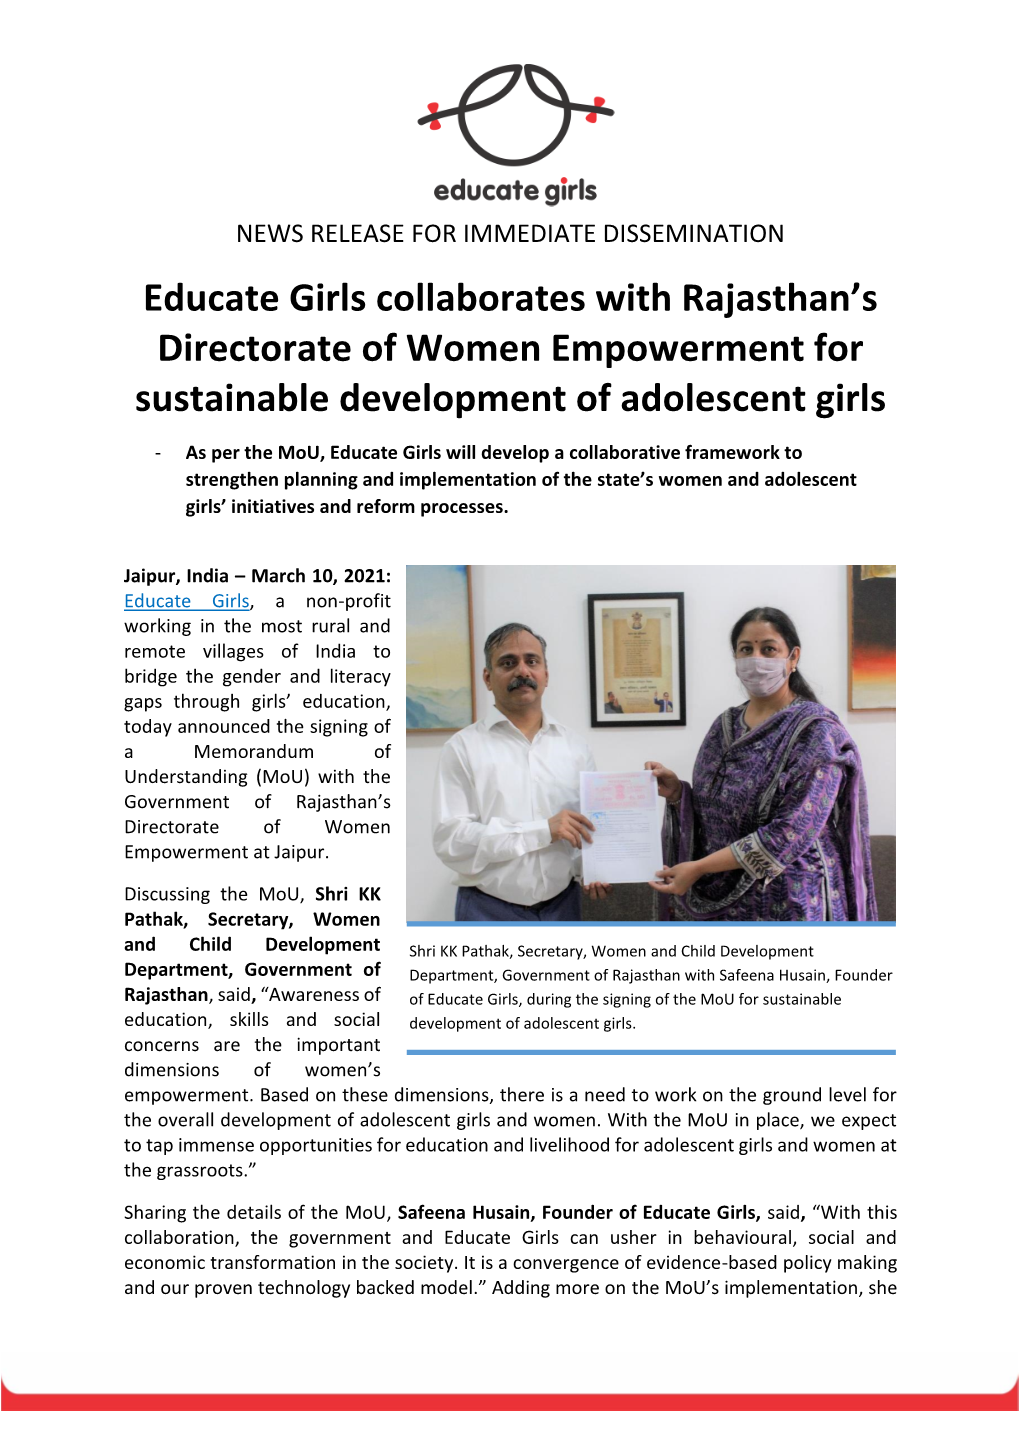 Educate Girls Signs Mou with Rajasthan WE